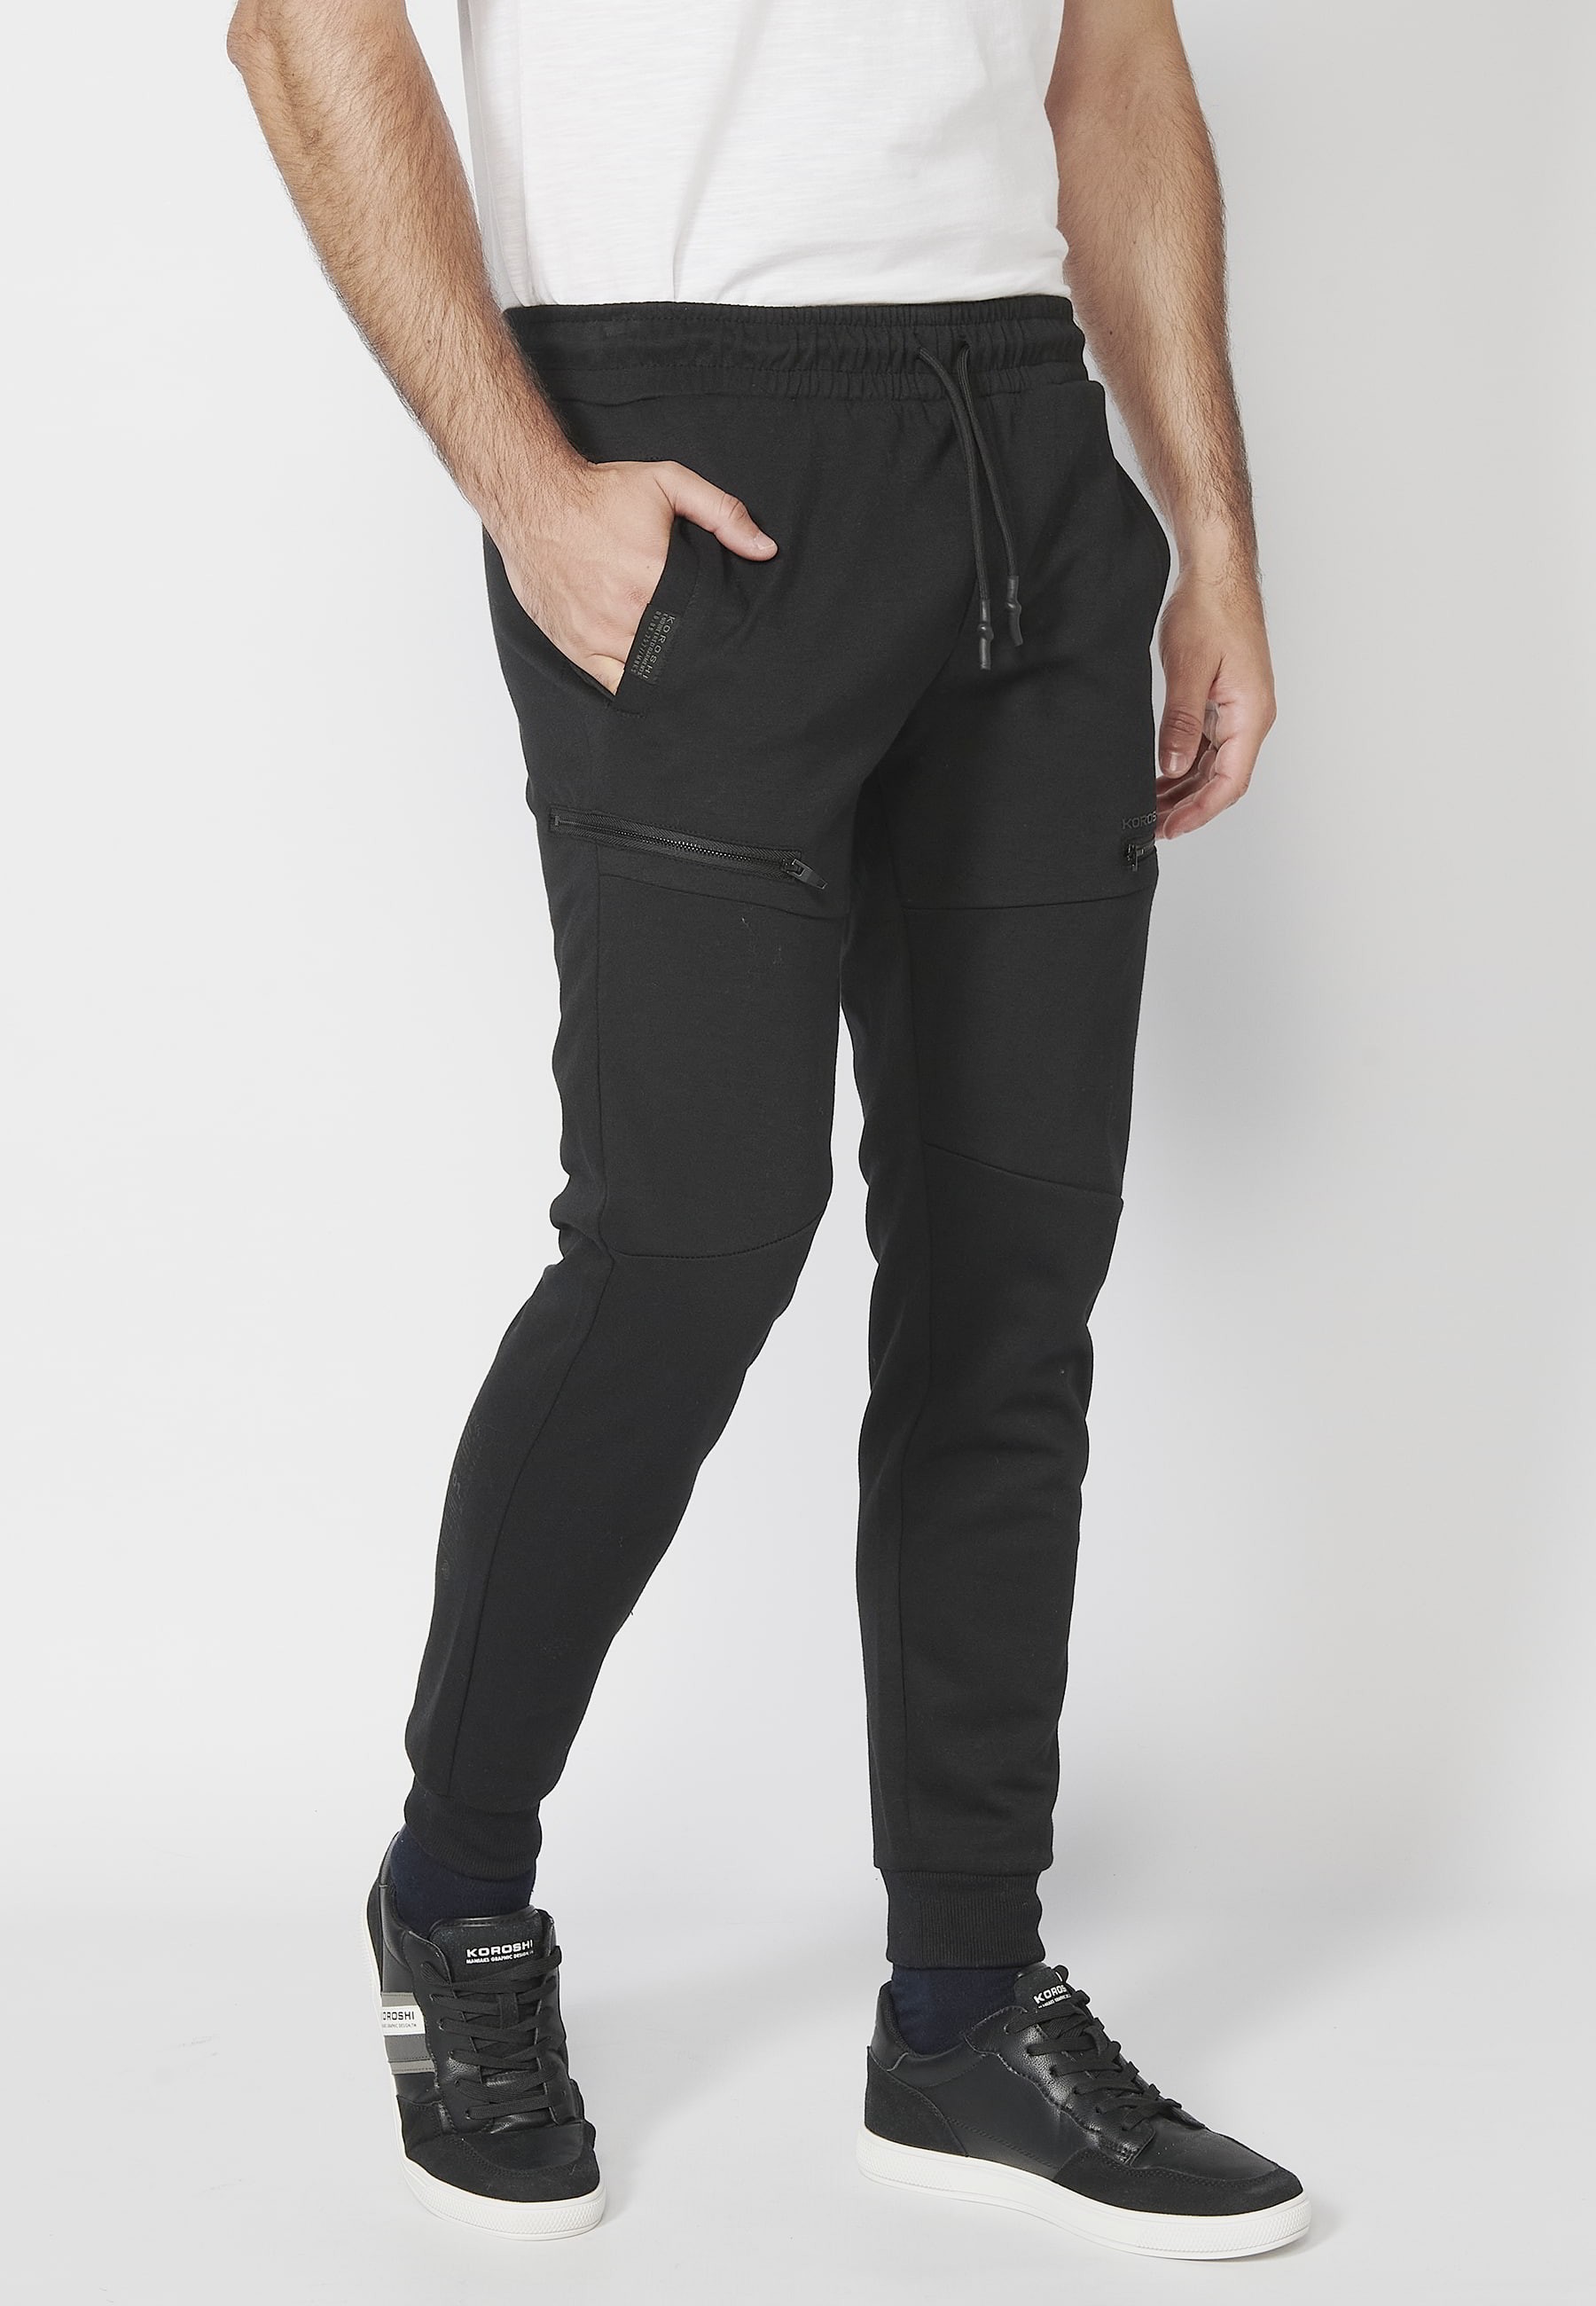 Long jogger pants with elasticated waistband and drawstring with cutouts in the knees in Black color for Men